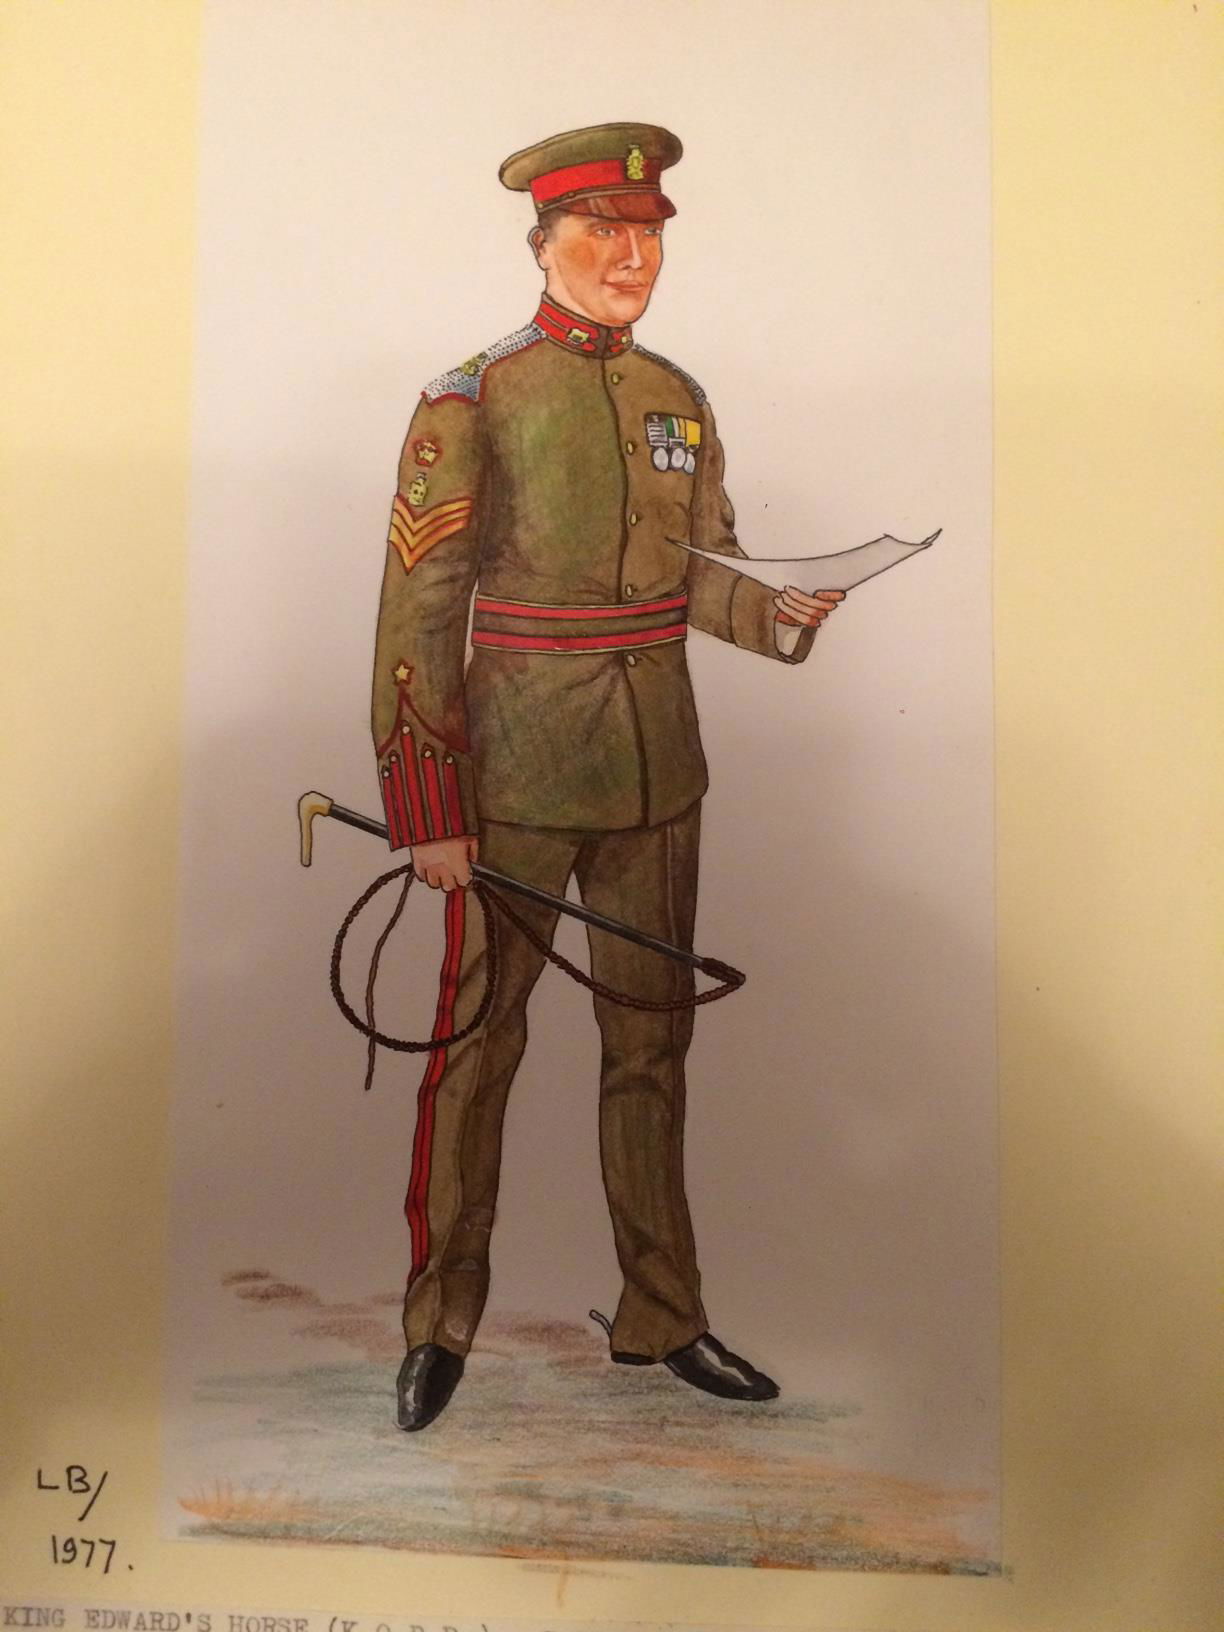 Painting of Squadron Sergeant Major Harry Campbell Calvert, King Edward’s Horse in Undress uniform with a forage cap with a tan leather peak circa 1912. Note that teh artist has added his lancer pattern girdle (waist belt).